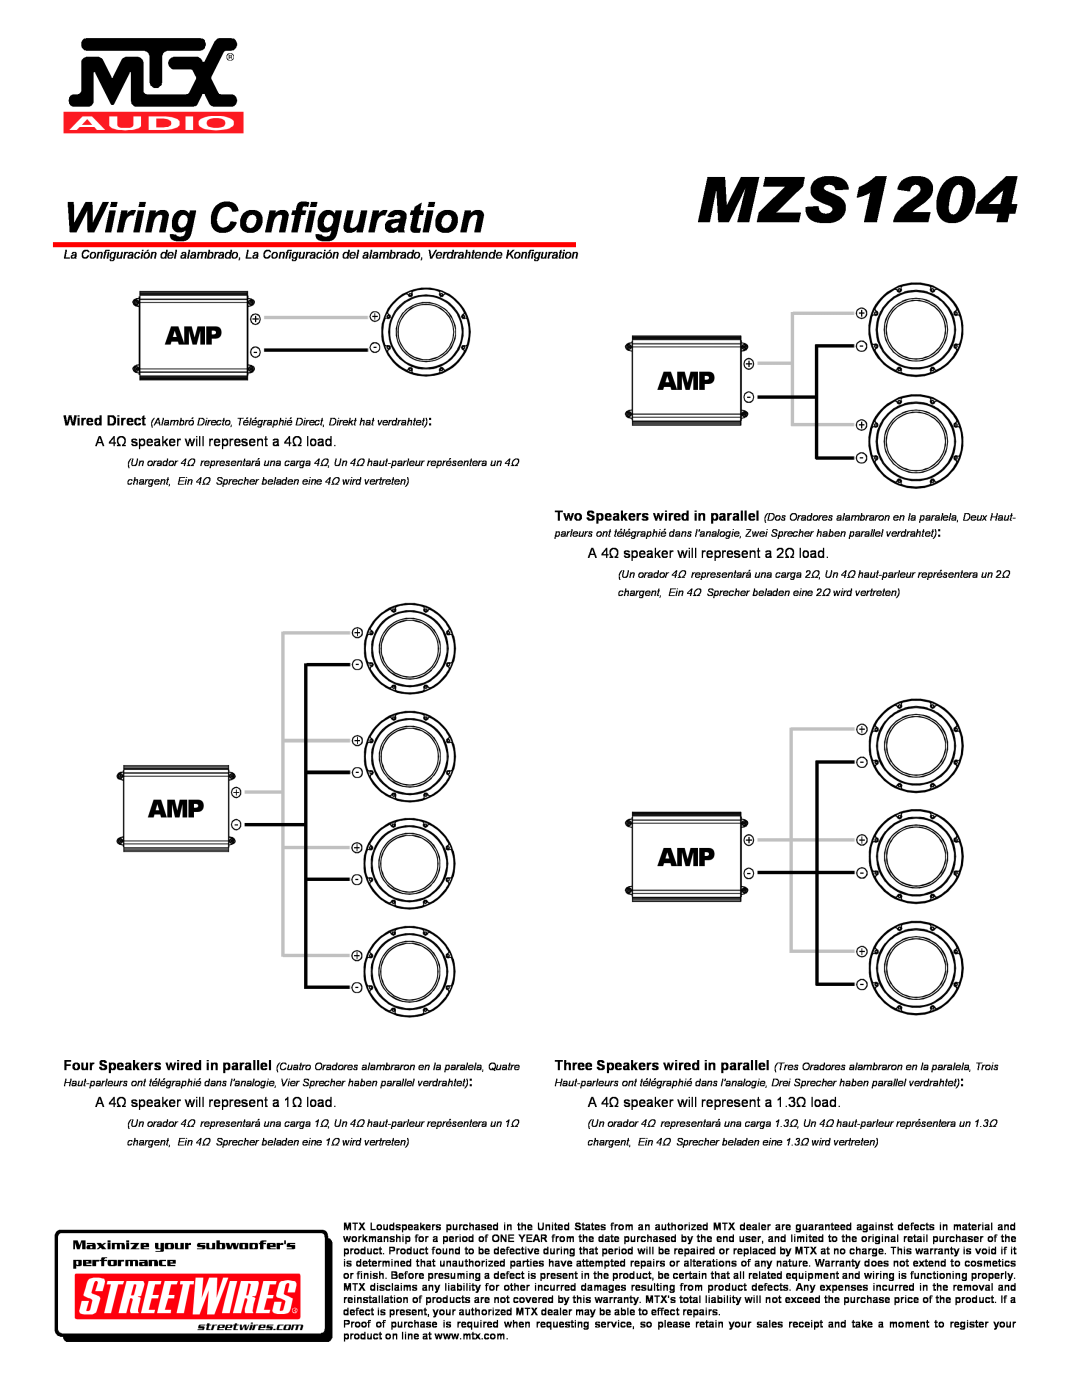 MTX Audio MZS1204 Wiring Configuration, A 4Ω speaker will represent a 4Ω load, A 4Ω speaker will represent a 2Ω load 